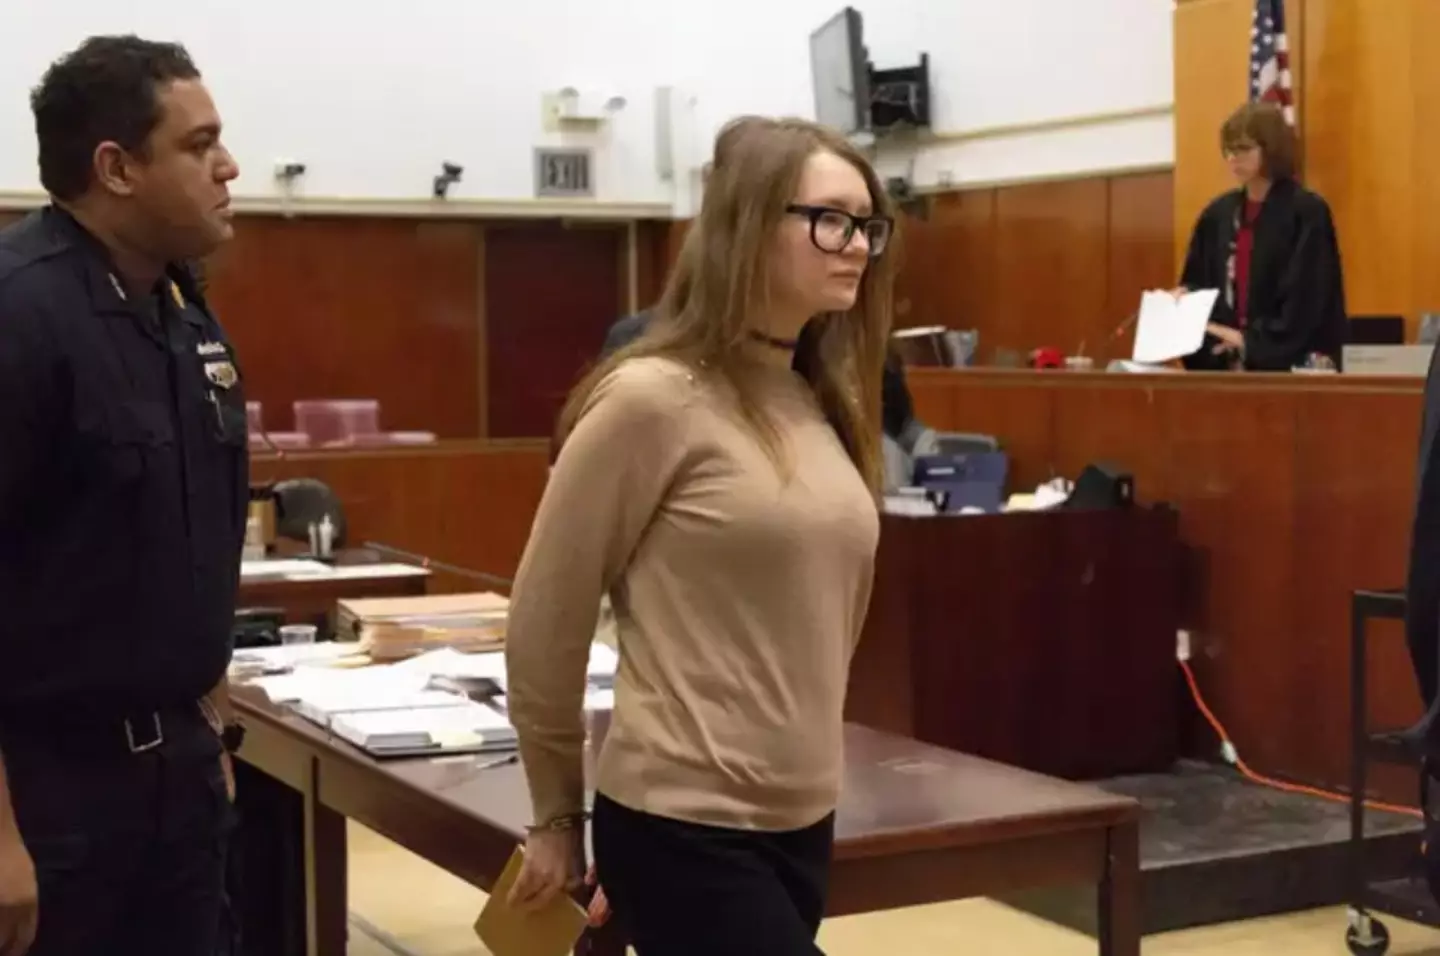 Anna Delvey is the subject of a new Netflix series (